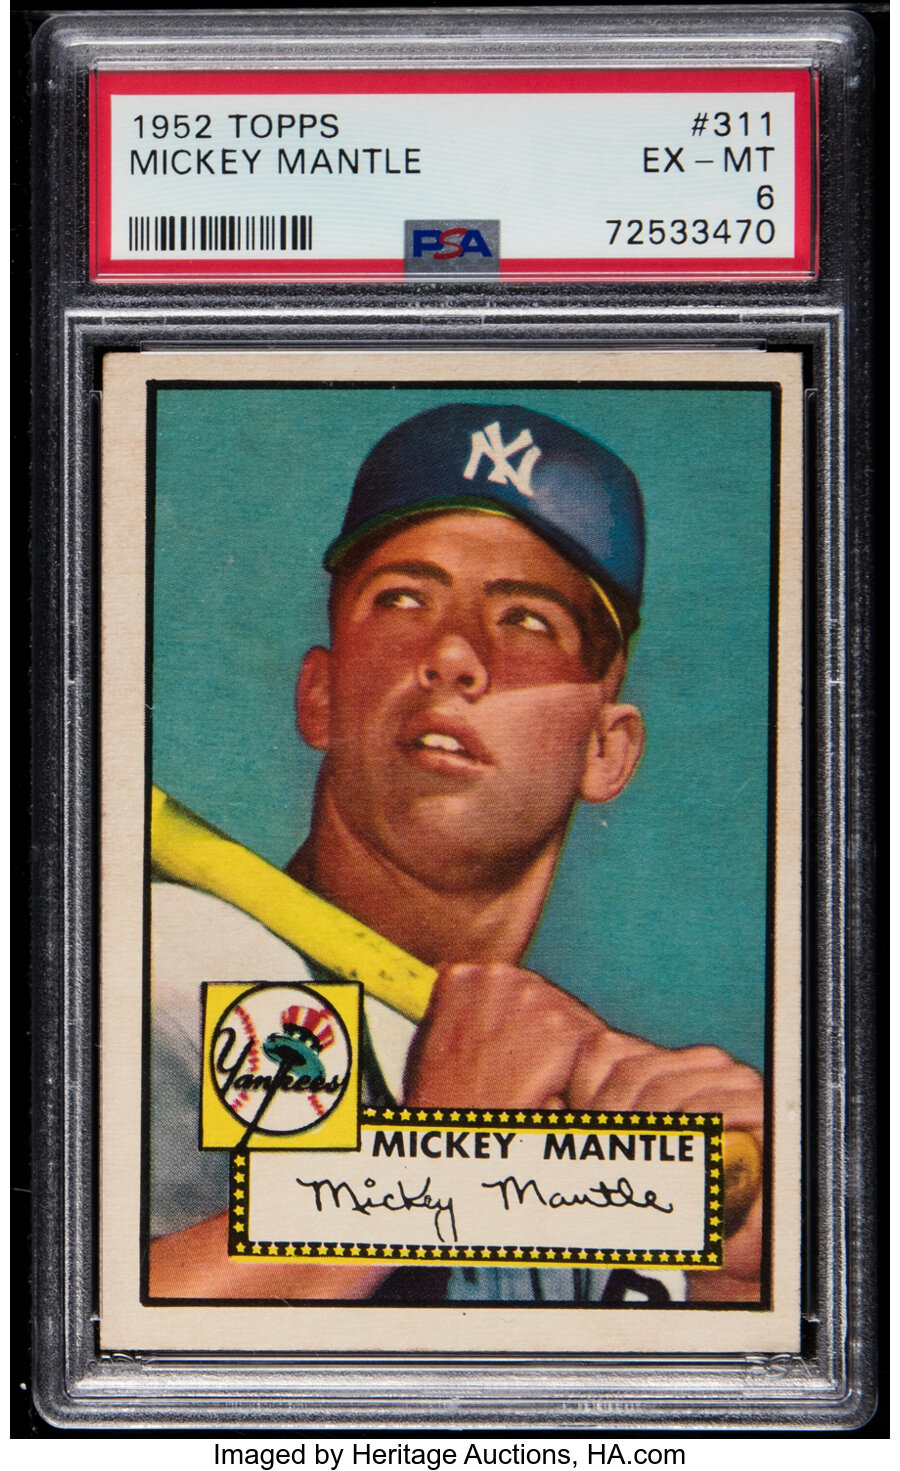 1952 Topps Mickey Mantle #311 PSA EX-MT 6--Consigned by Original Owner!